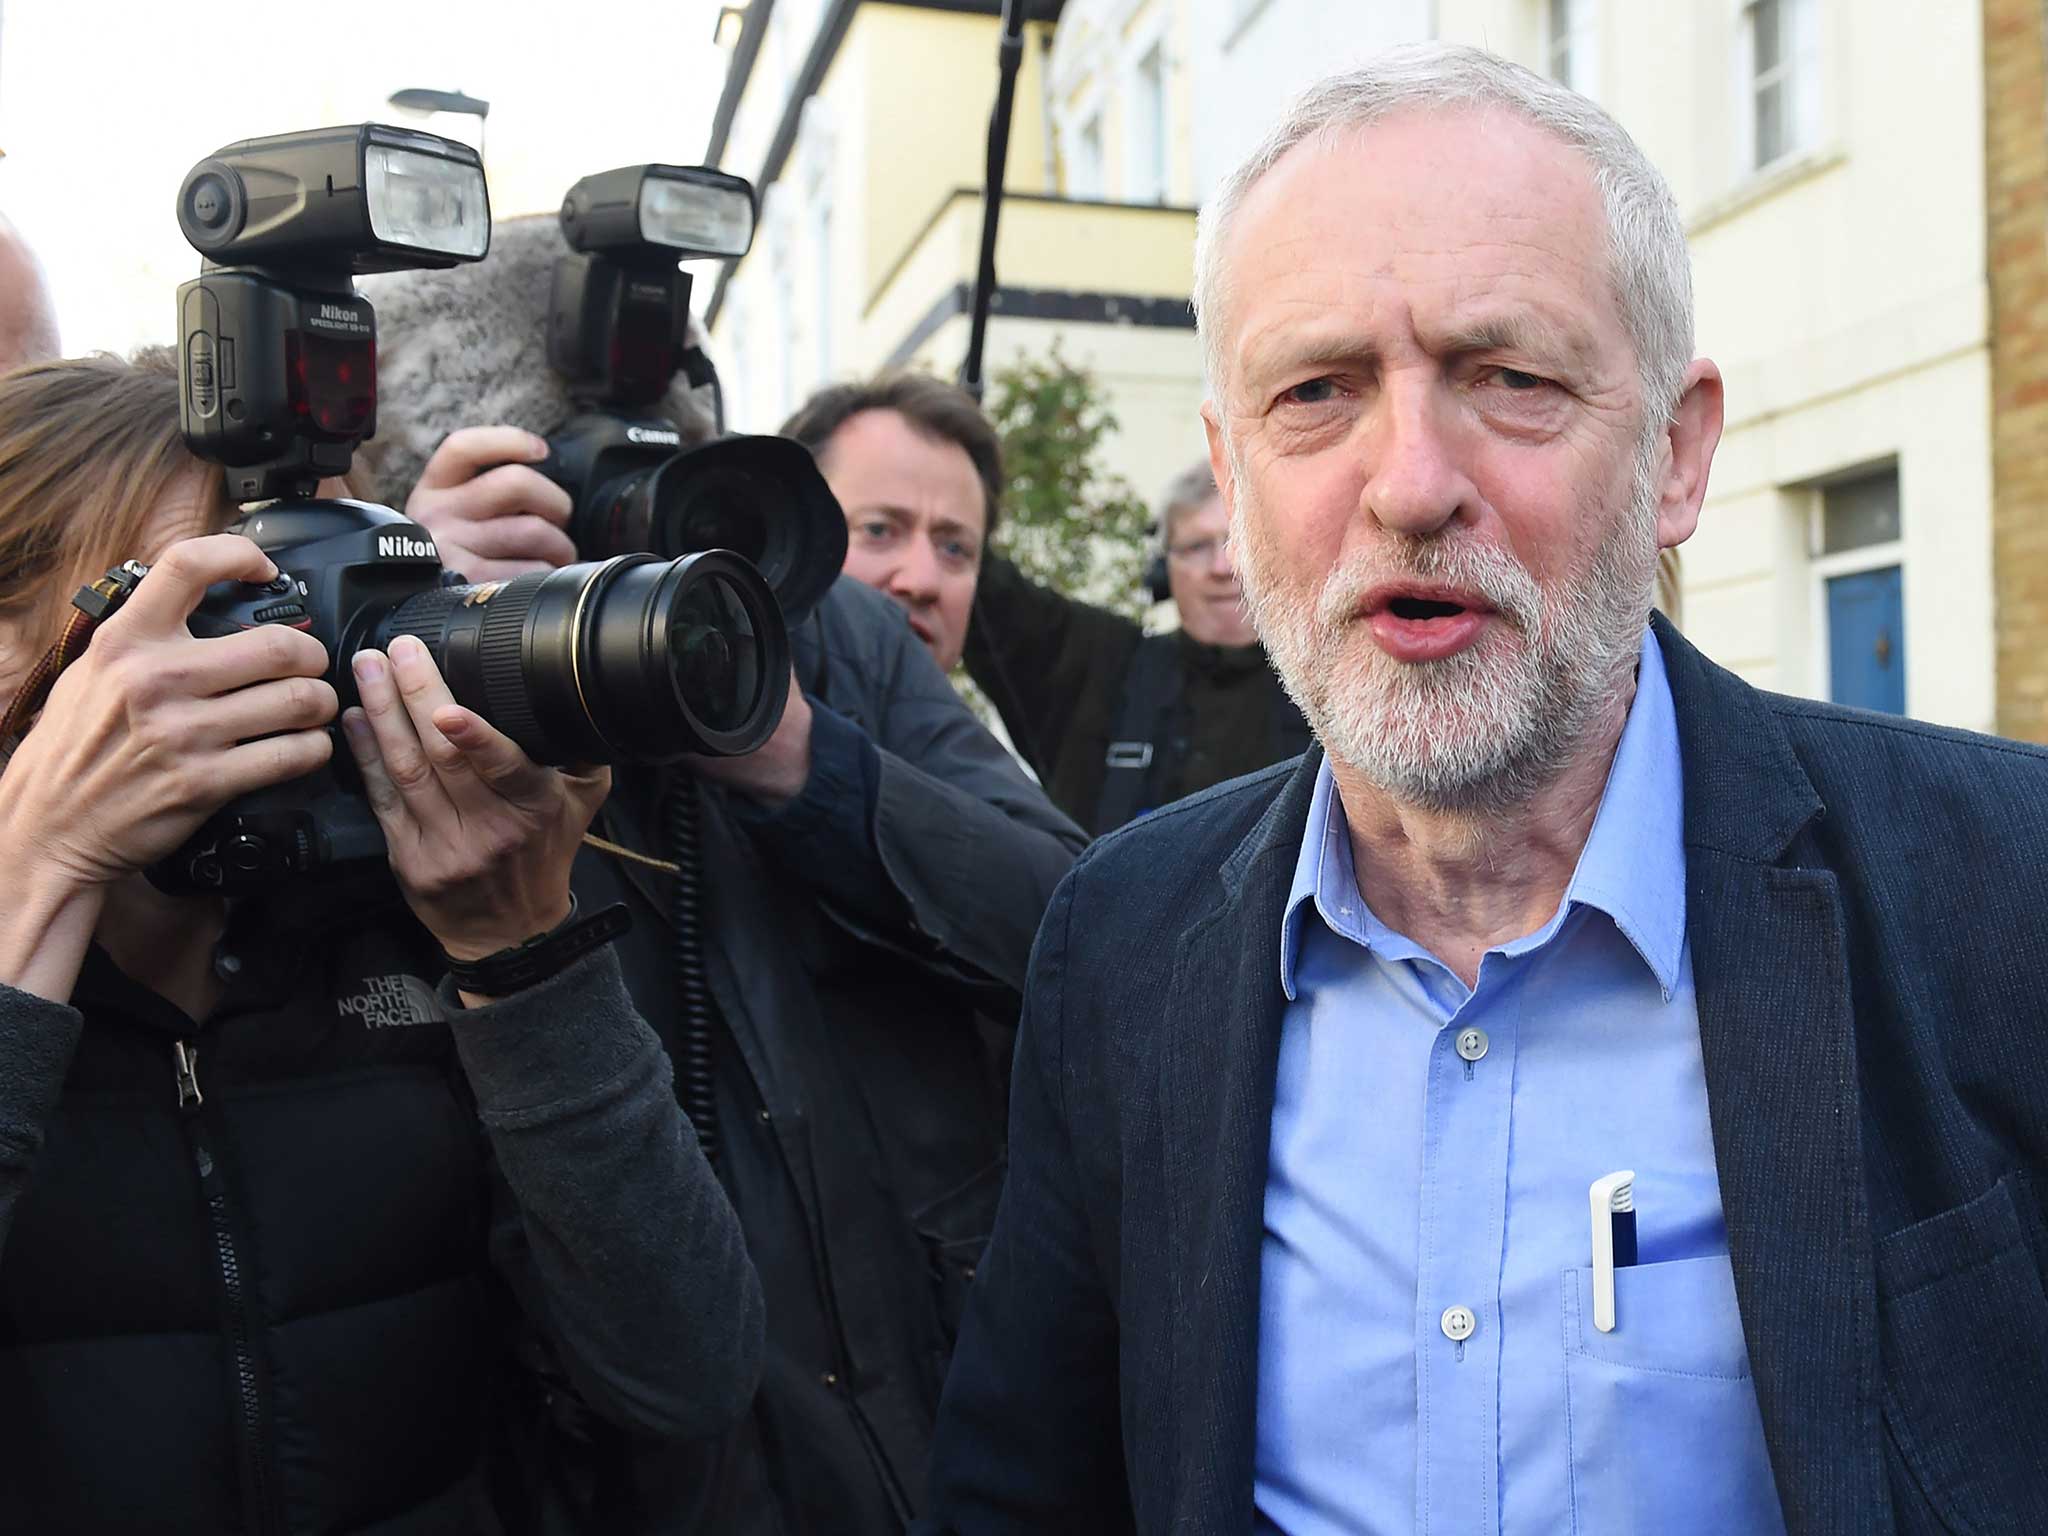 Jeremy Corbyn has said his party is 'anti-racist' and has a 'proud history of standing against racism, including anti-semitism'